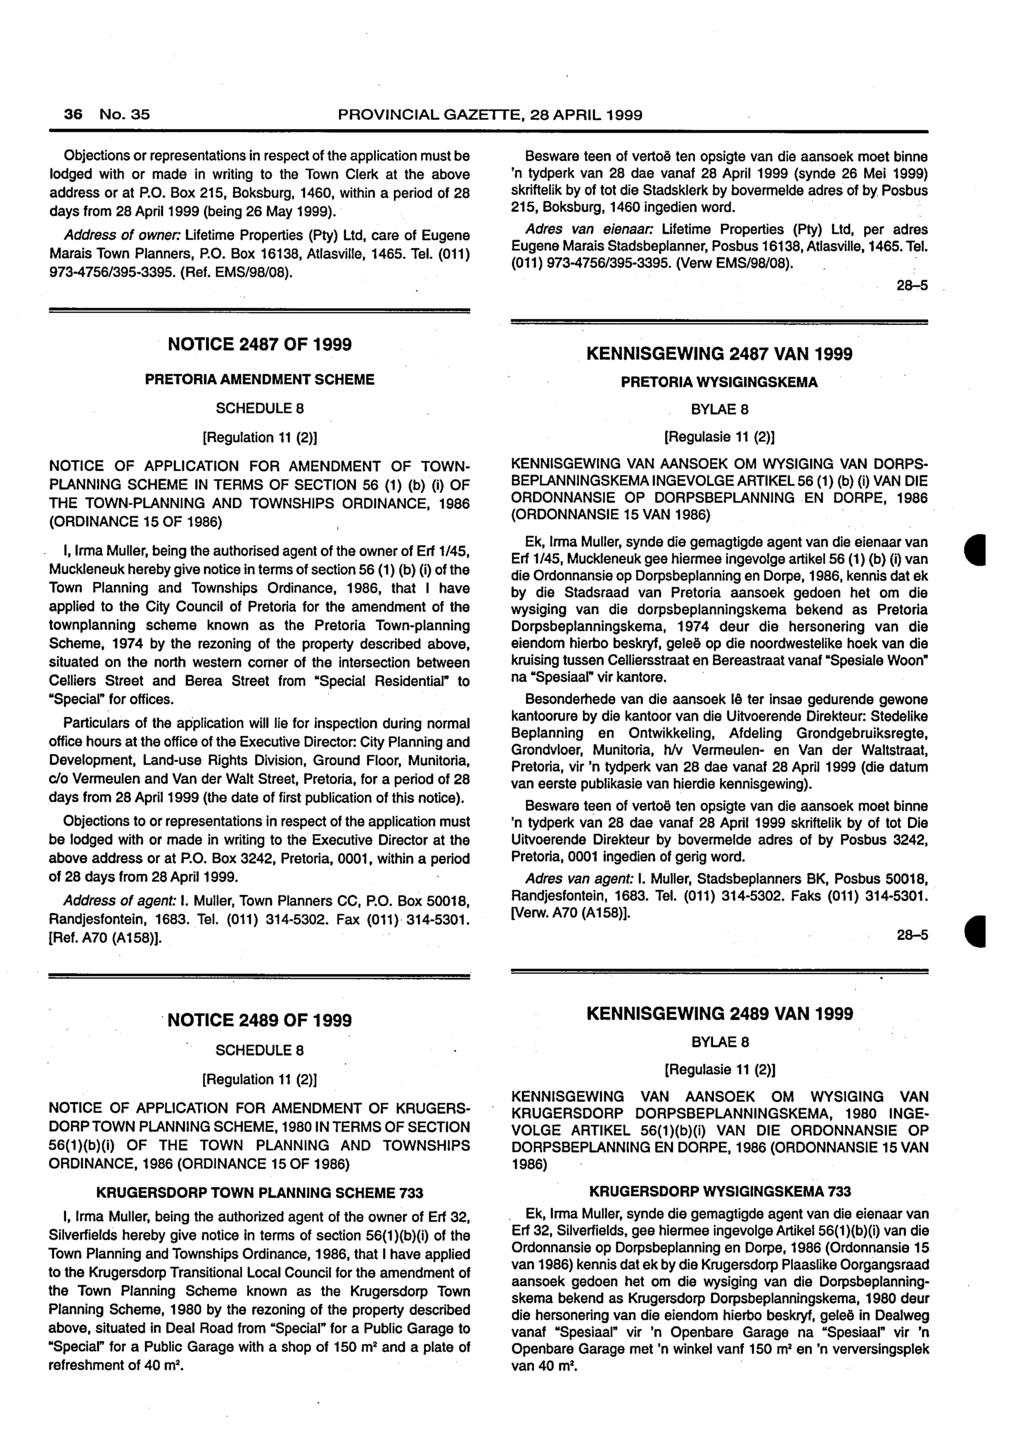 36 No. 35 PROVINCIAL GAZETTE, 28 APRIL 1999 Objections or representations in respect of the application must be lodged with or made in writing to the Town Clerk at the above address or at P.O. Box 215, Boksburg, 1460, within a period of 2S days from 2S April 1999 (being 26 May 1999).